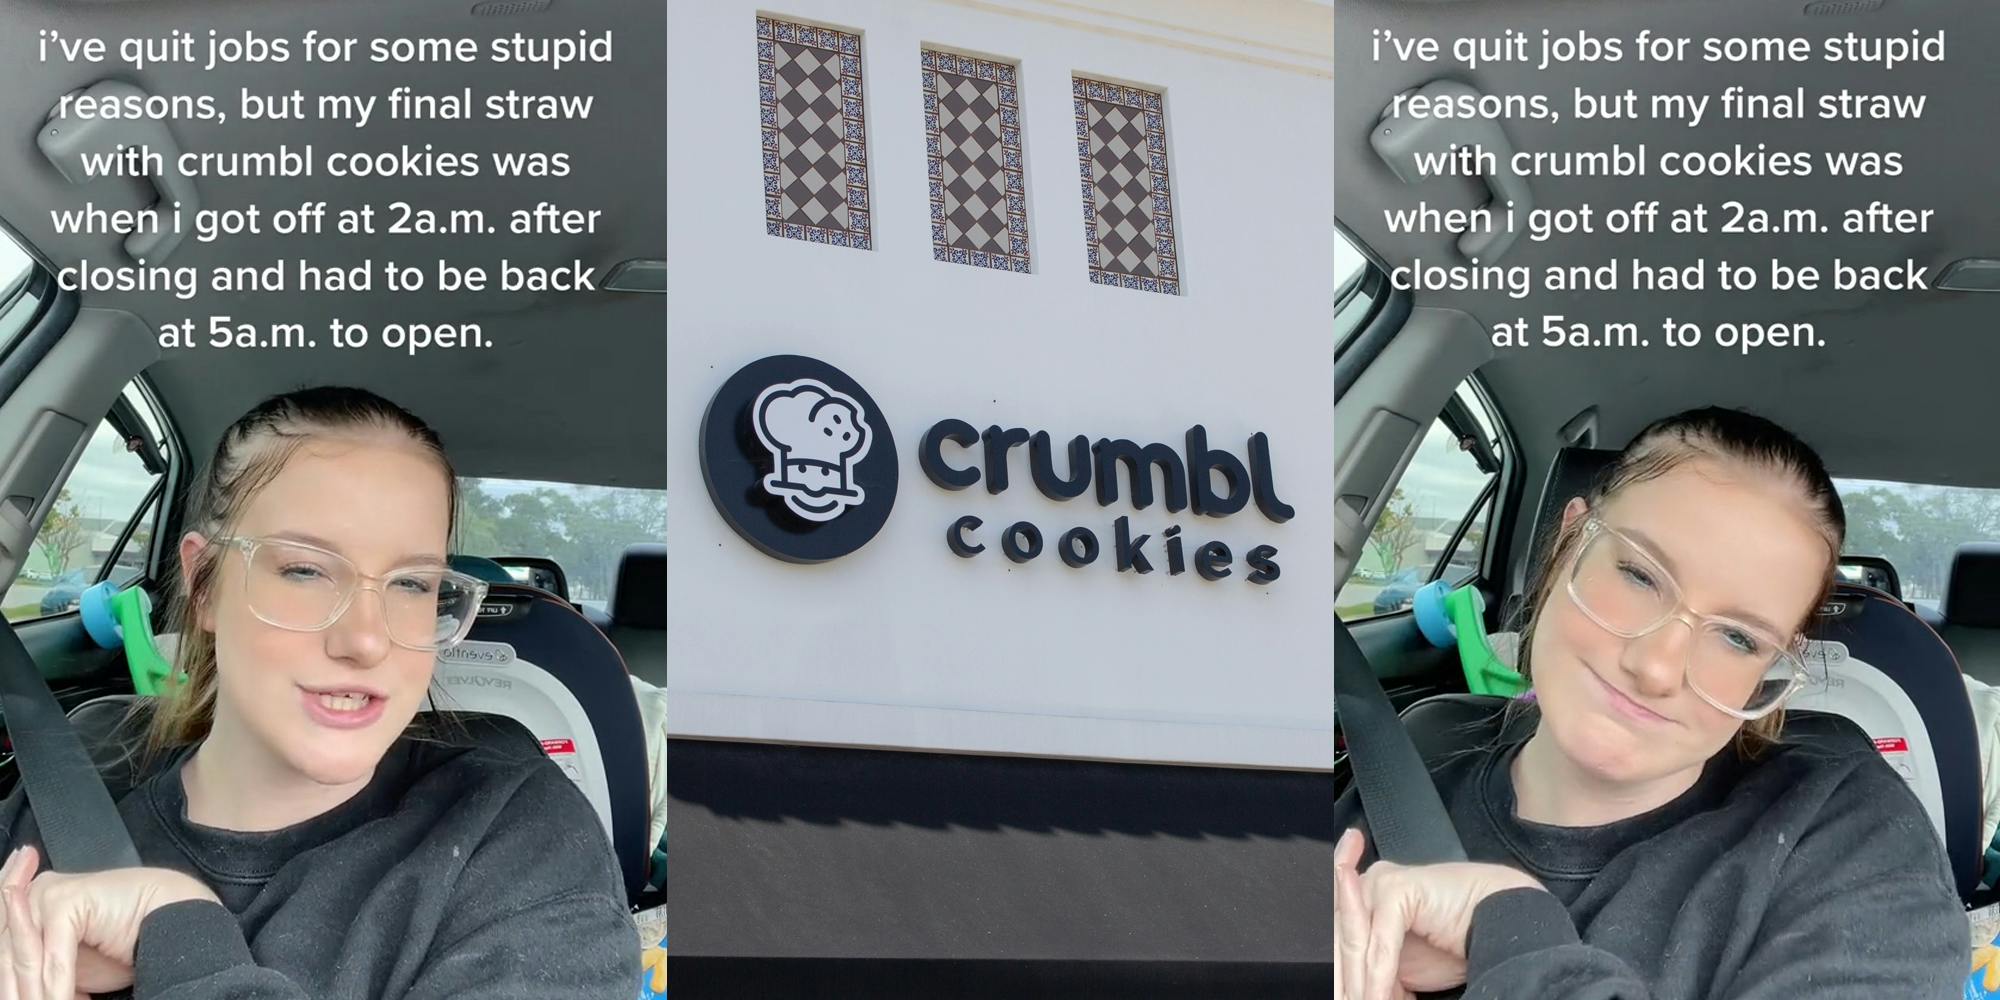 Crumbl former employee in car with caption "i've quit jobs for some stupid reasons, but my final straw with crumbl was when i got off at 2a.m. after closing and had to be back at 5a.m. to open." (l) Crumbl Cookies sign on building (c) Crumbl former employee in car with caption "i've quit jobs for some stupid reasons, but my final straw with crumbl was when i got off at 2a.m. after closing and had to be back at 5a.m. to open." (r)